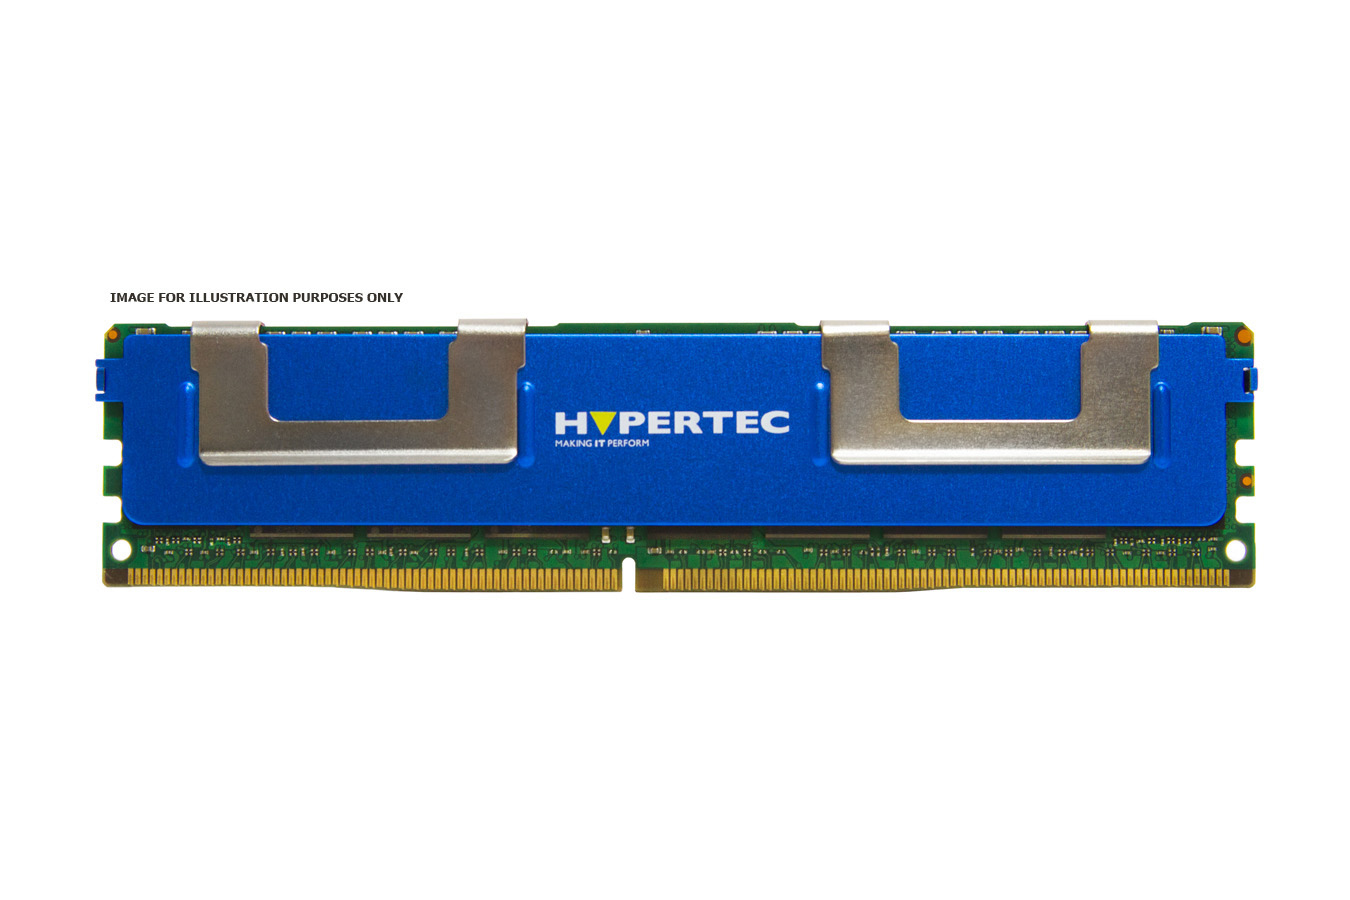 A6236346-HY HYPERTEC A Dell equivalent 8 GB Dual rank- Low Voltage - registered ECC DDR3 SDRAM - DIMM 240-pin 1333 MHz ( PC3-10600 )Legacy from Hypertec